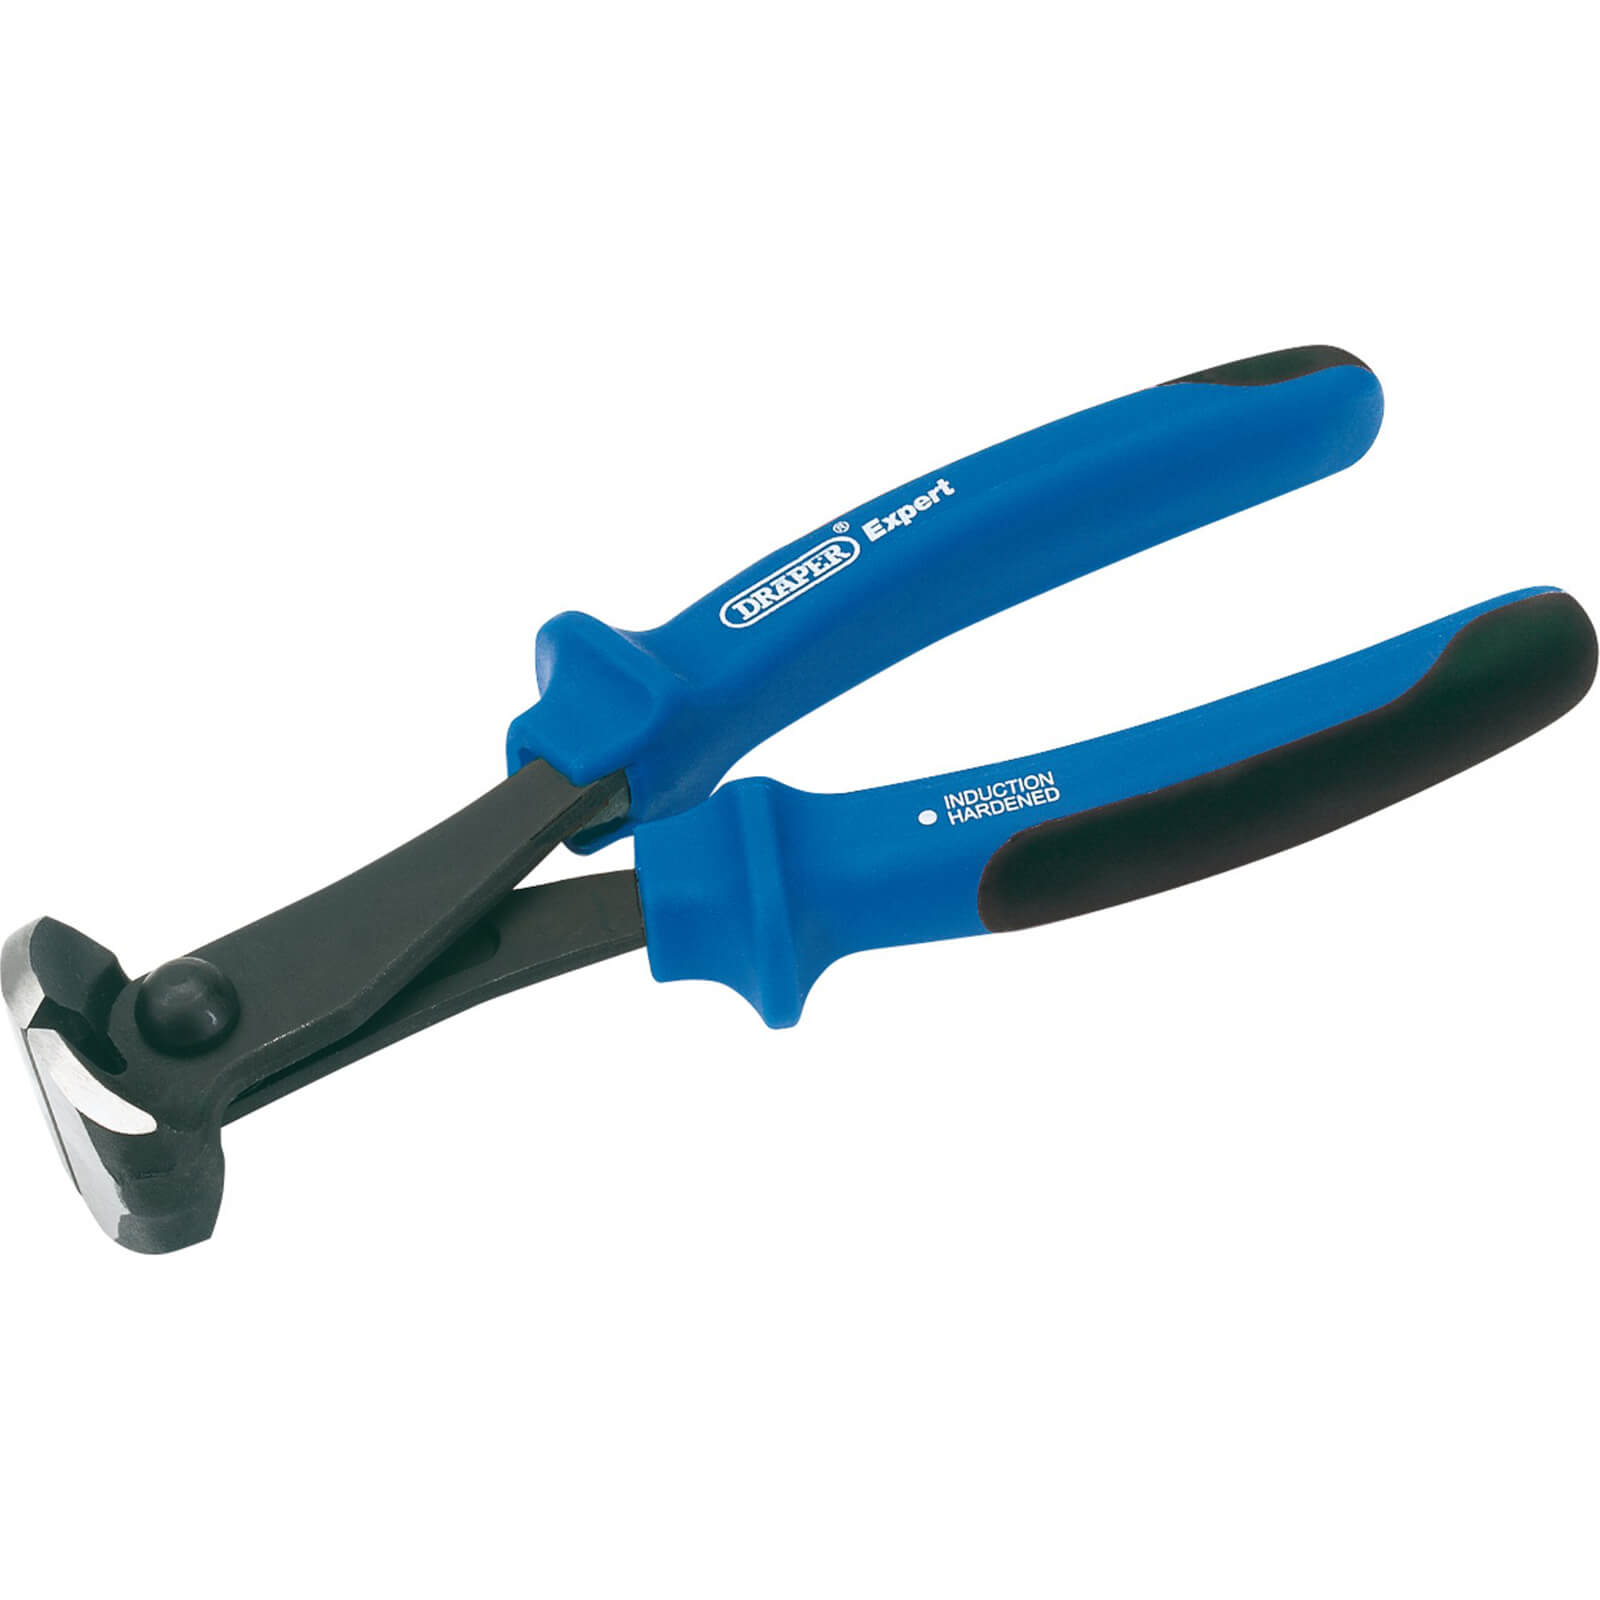 Image of Draper Expert Heavy Duty Soft Grip End Cutting Pliers 200mm